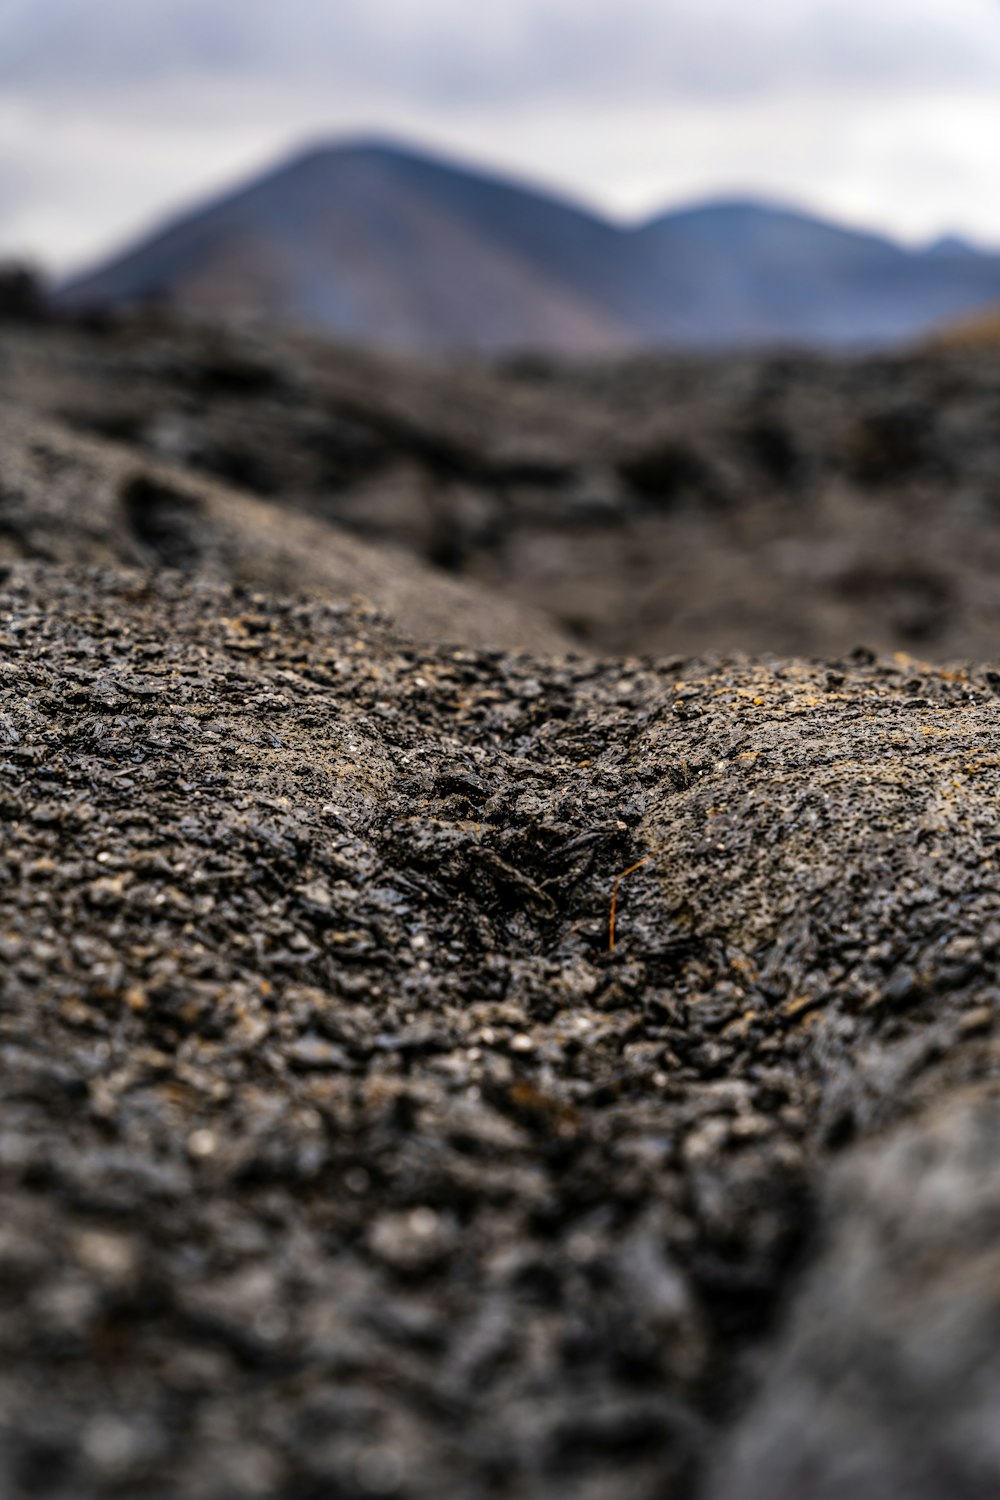 a close up of a dirt surface with mountains in the background